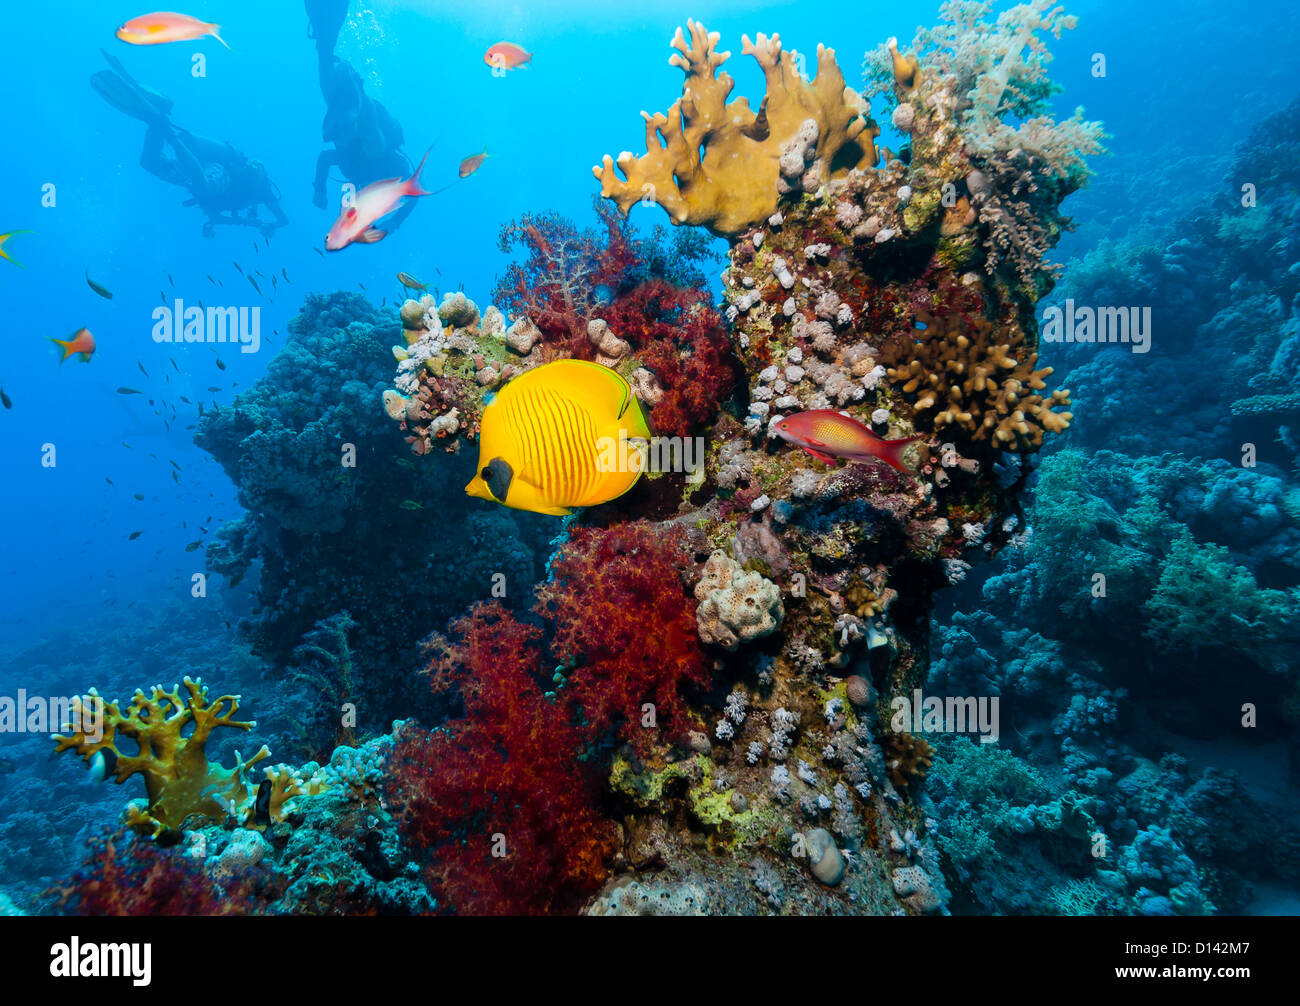 Silhouette of SCUBA divers behind a bright yellow masked butterflyfish along with hard and soft corals on a coral reef Stock Photo